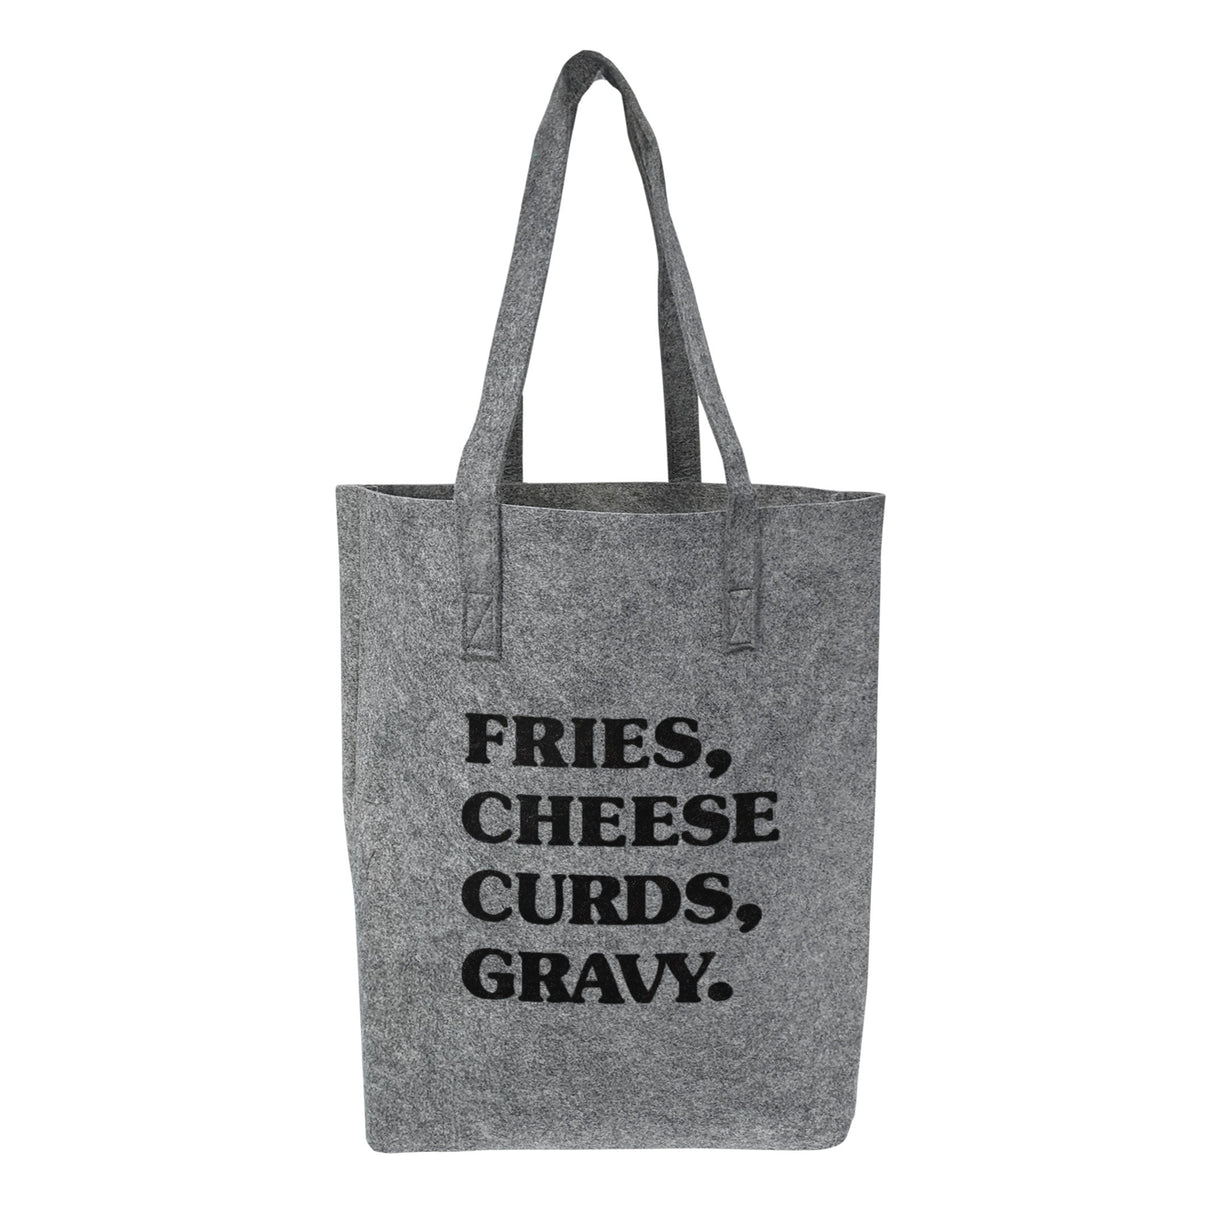 Fries Cheese Curds Gravy Recycled Felt Tote Bag